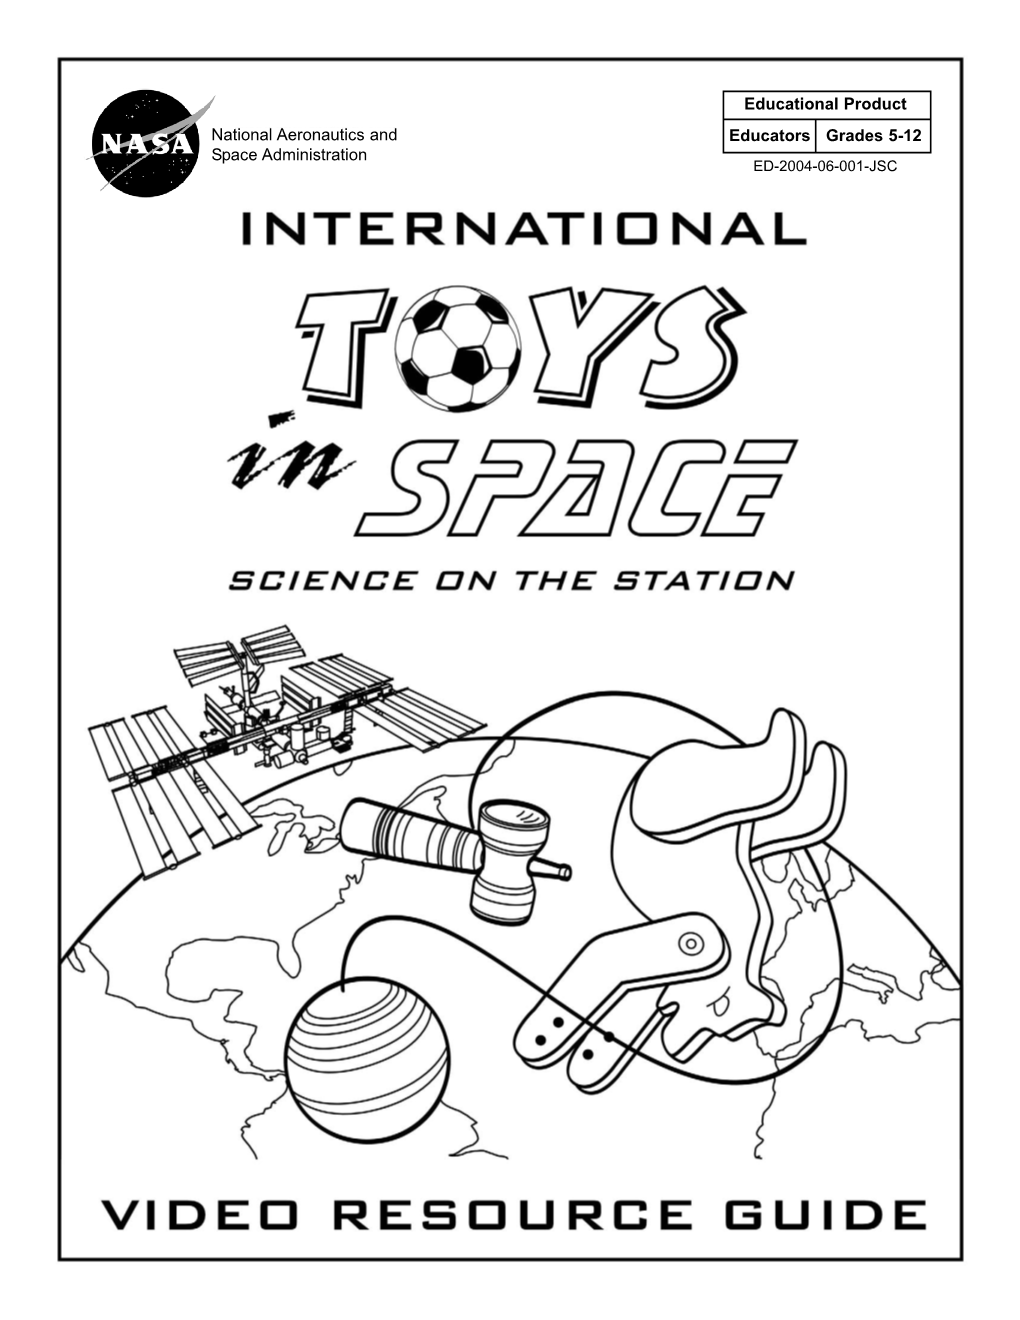 International Toys in Space Video Resource Guide